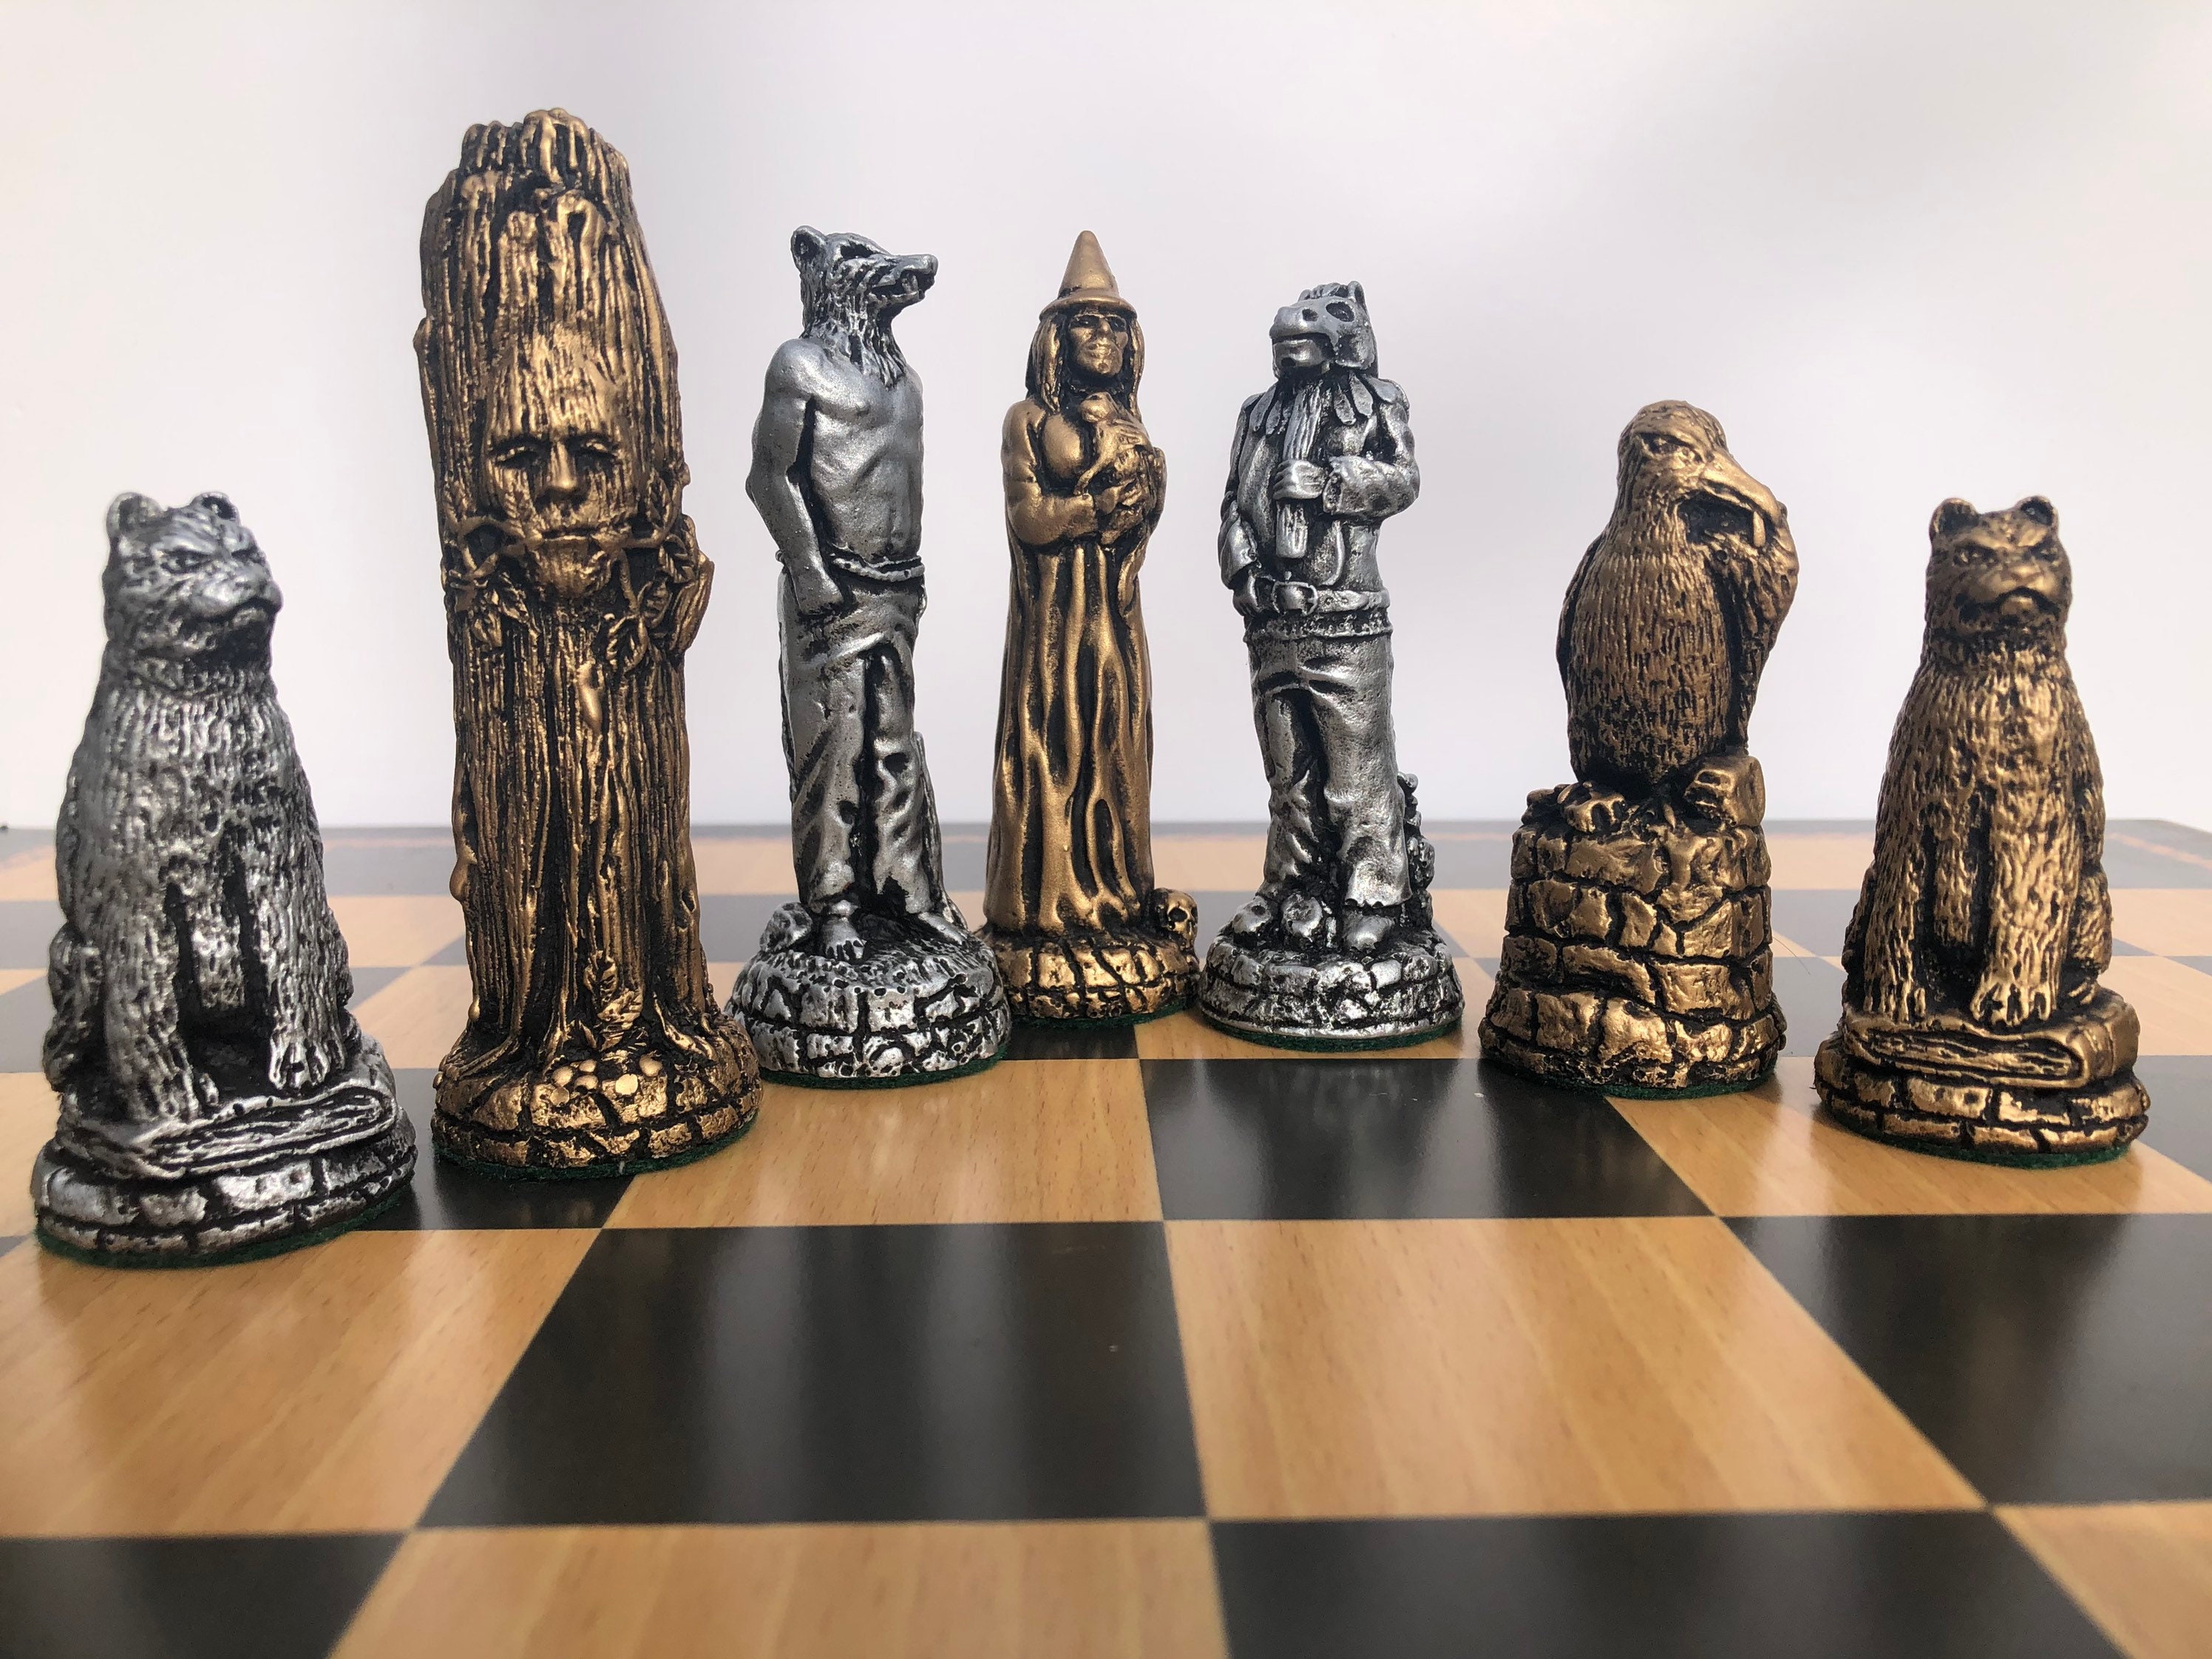 Myth and magic chess set handmade chess pieces with a Wiccan -  Portugal